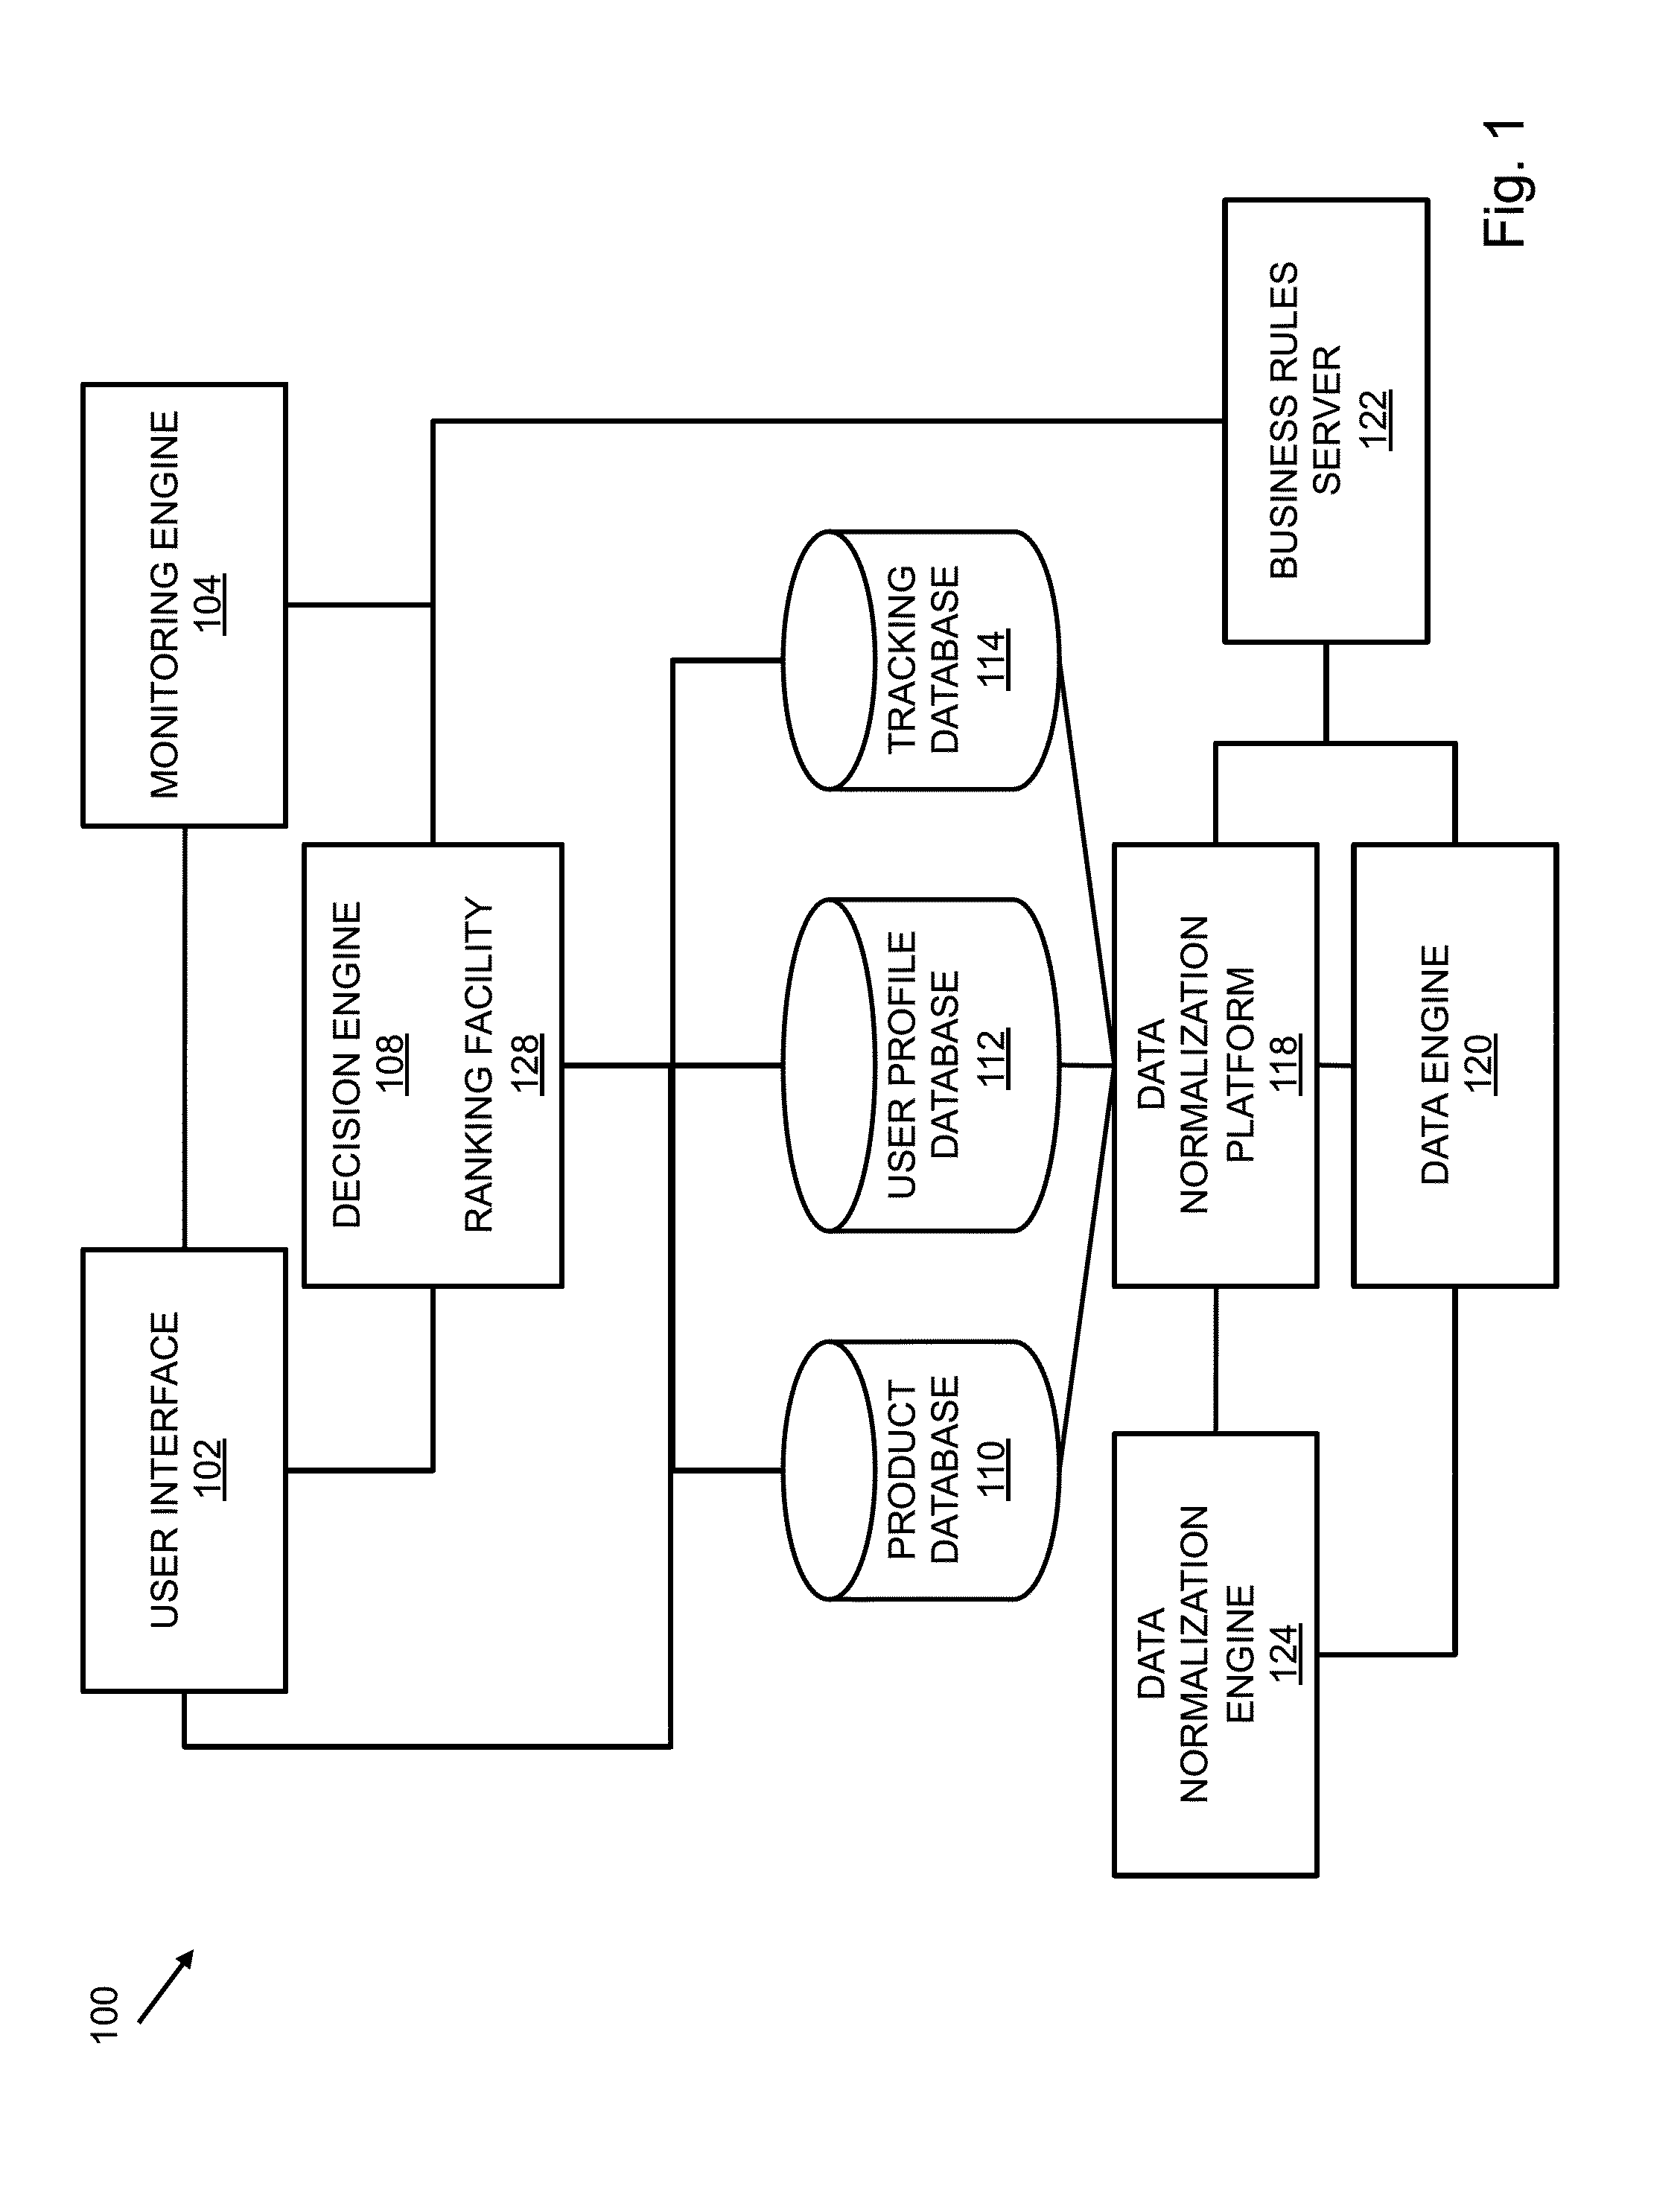 System and method for providing a geographic map of alternative savings opportunities in association with a financial transaction data